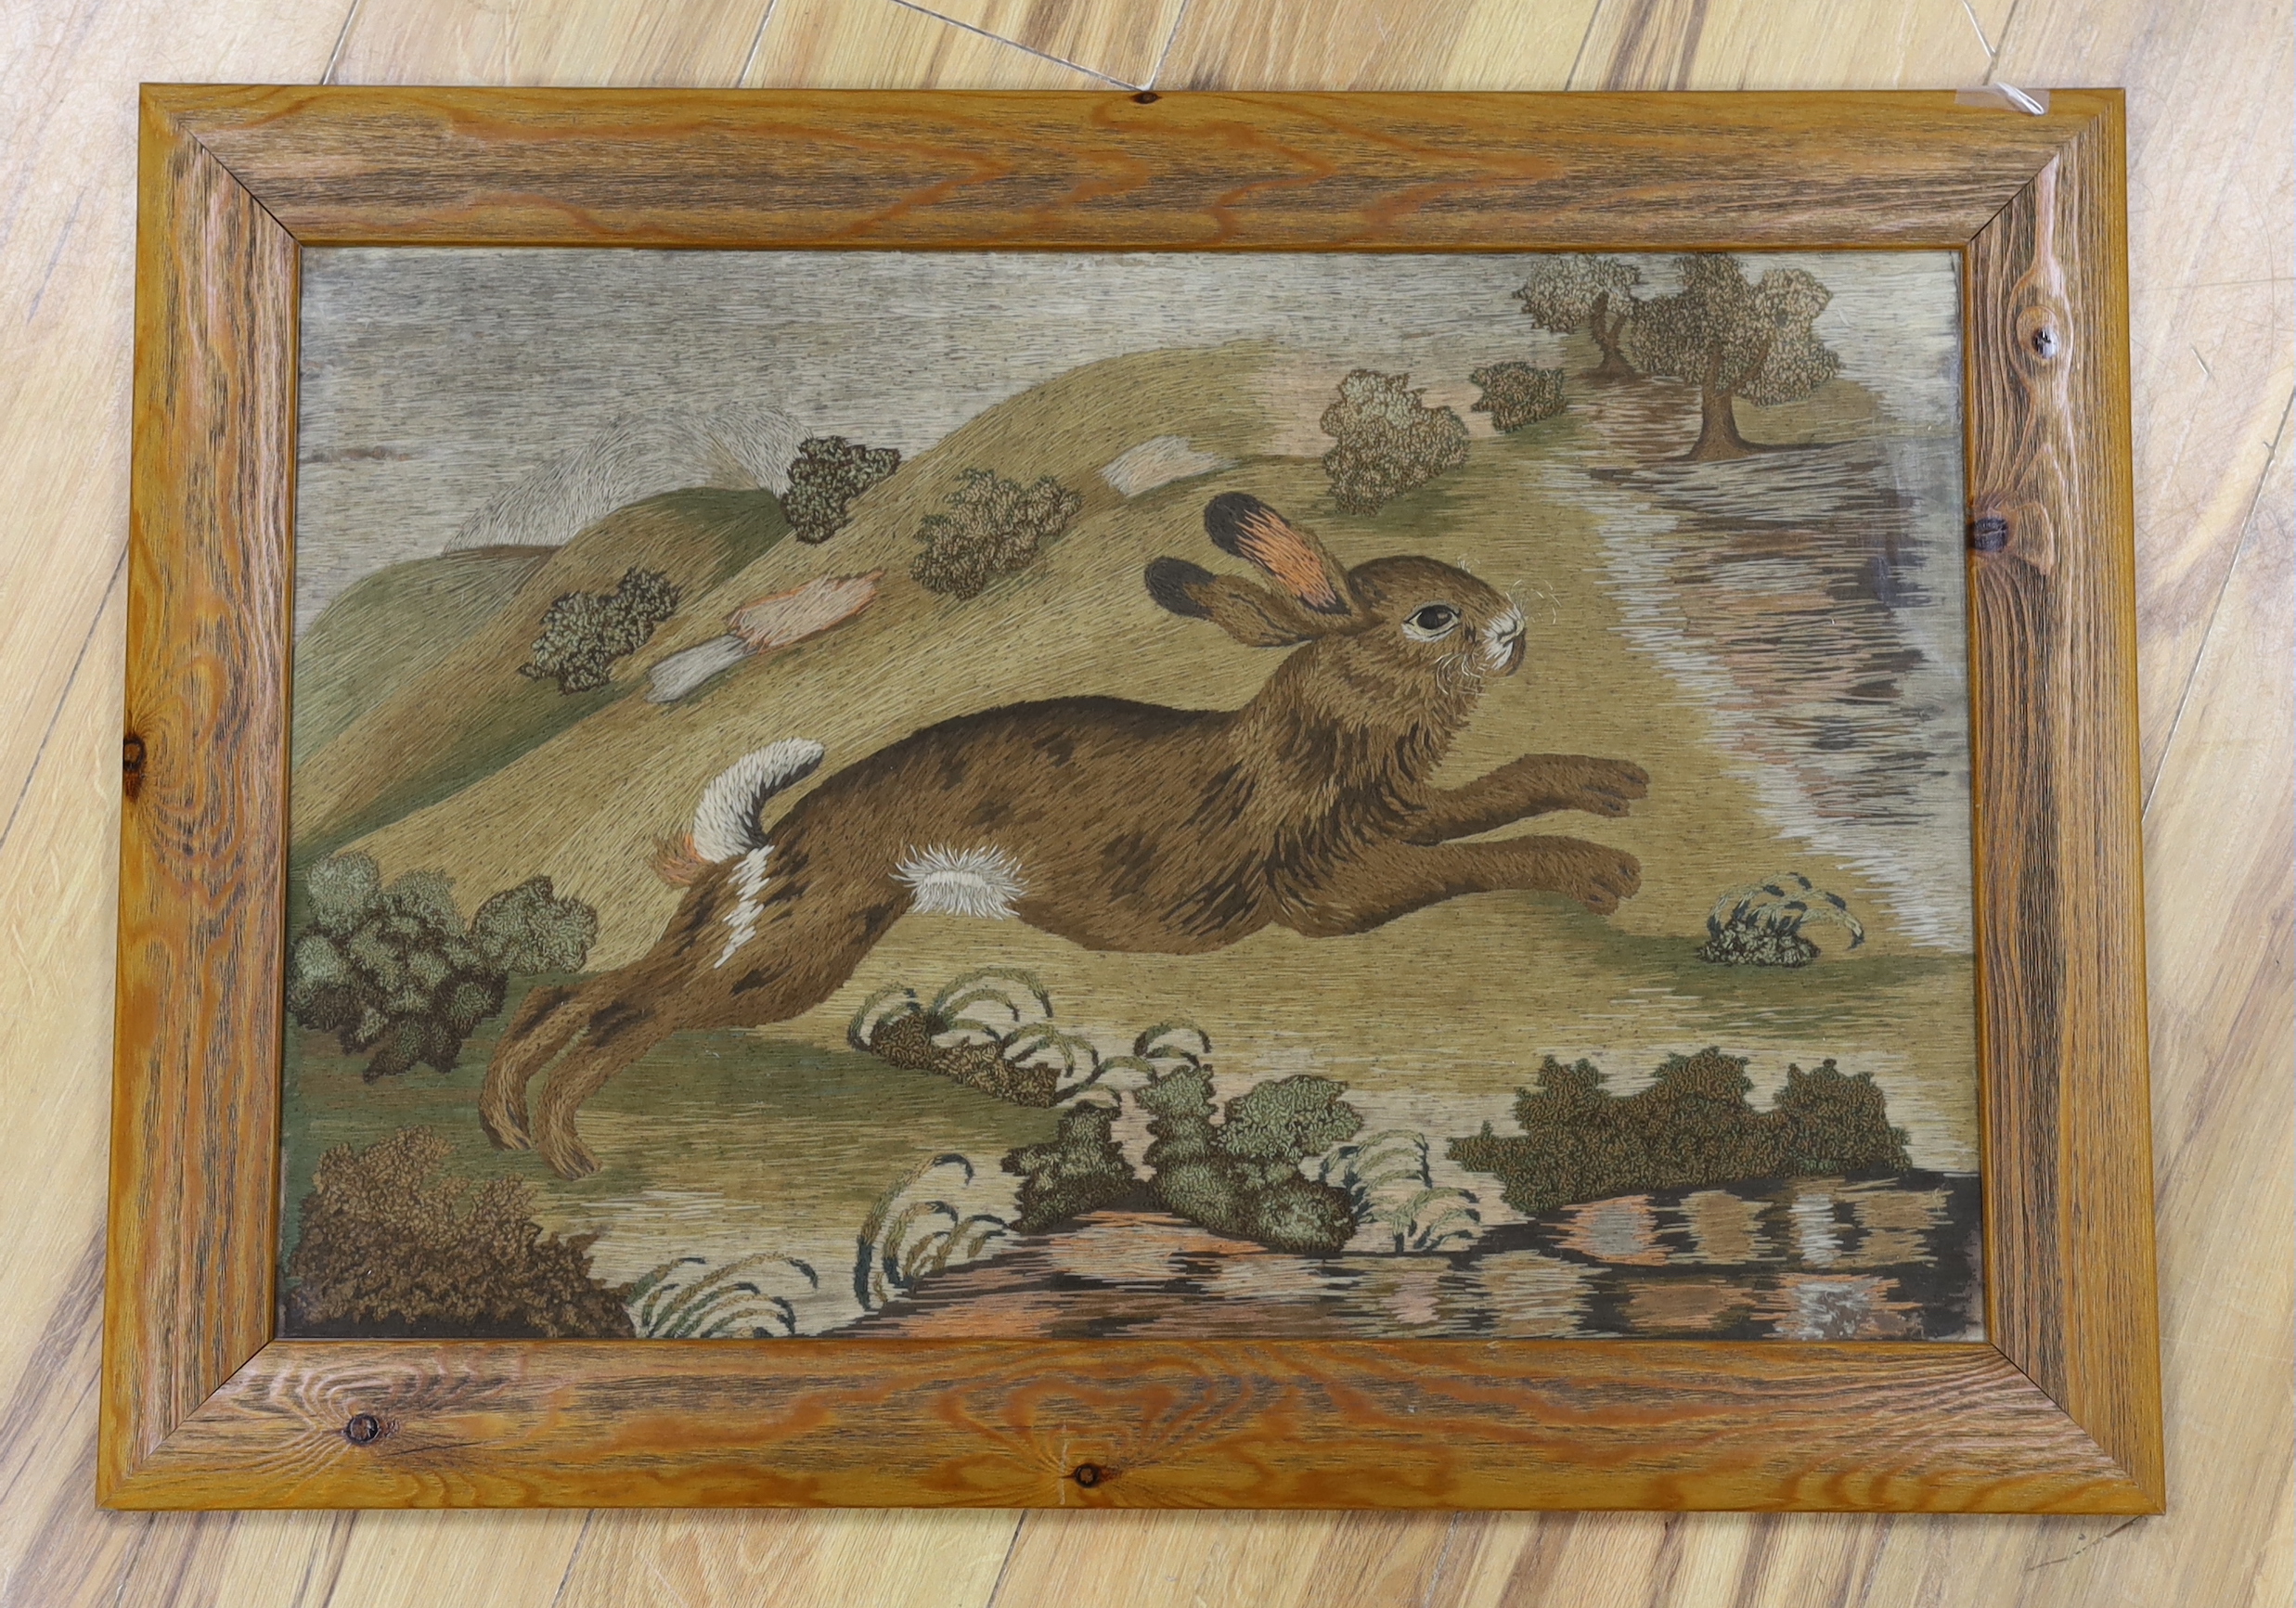 A late 19th century framed woolwork embroidered panel of a rabbit running through the countryside, worked mostly in stem stitch and raised knotting, 66.5cm wide x 42cm high